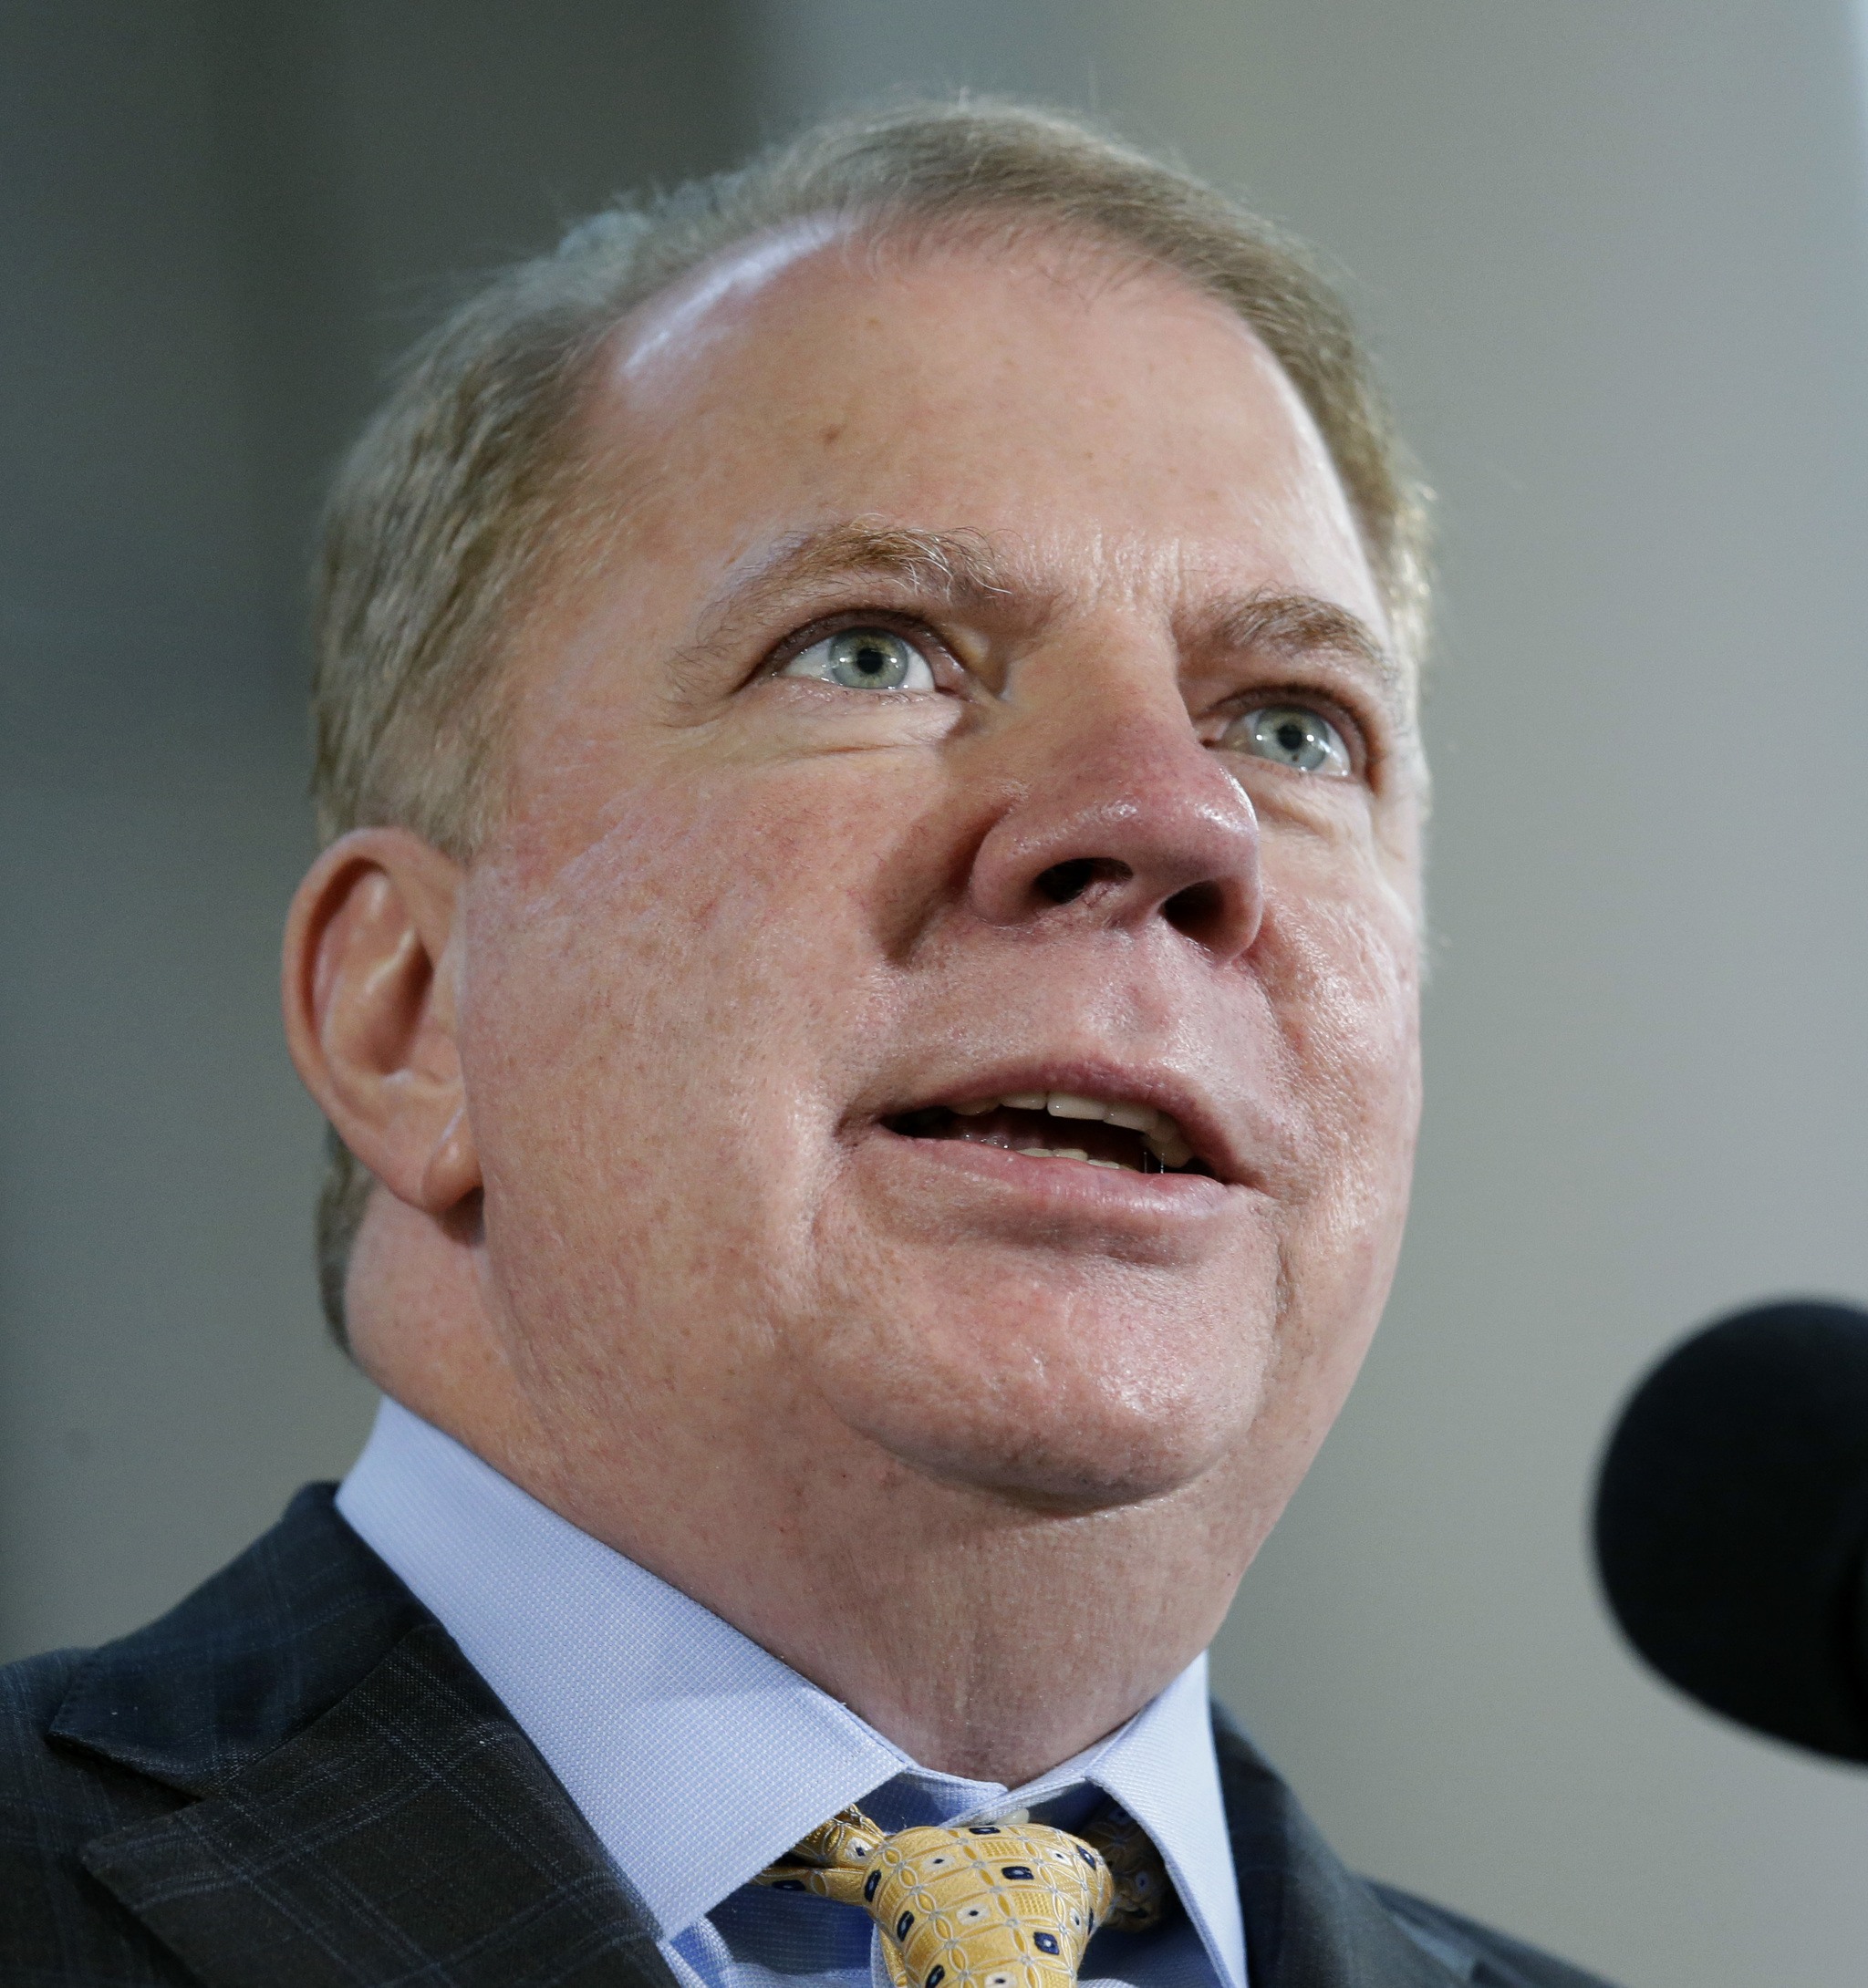 In this Oct. 10 photo, Seattle Mayor Ed Murray speaks at a celebration of Indigenous Peoples’ Day in Seattle. (Elaine Thompson/The Associated Press)